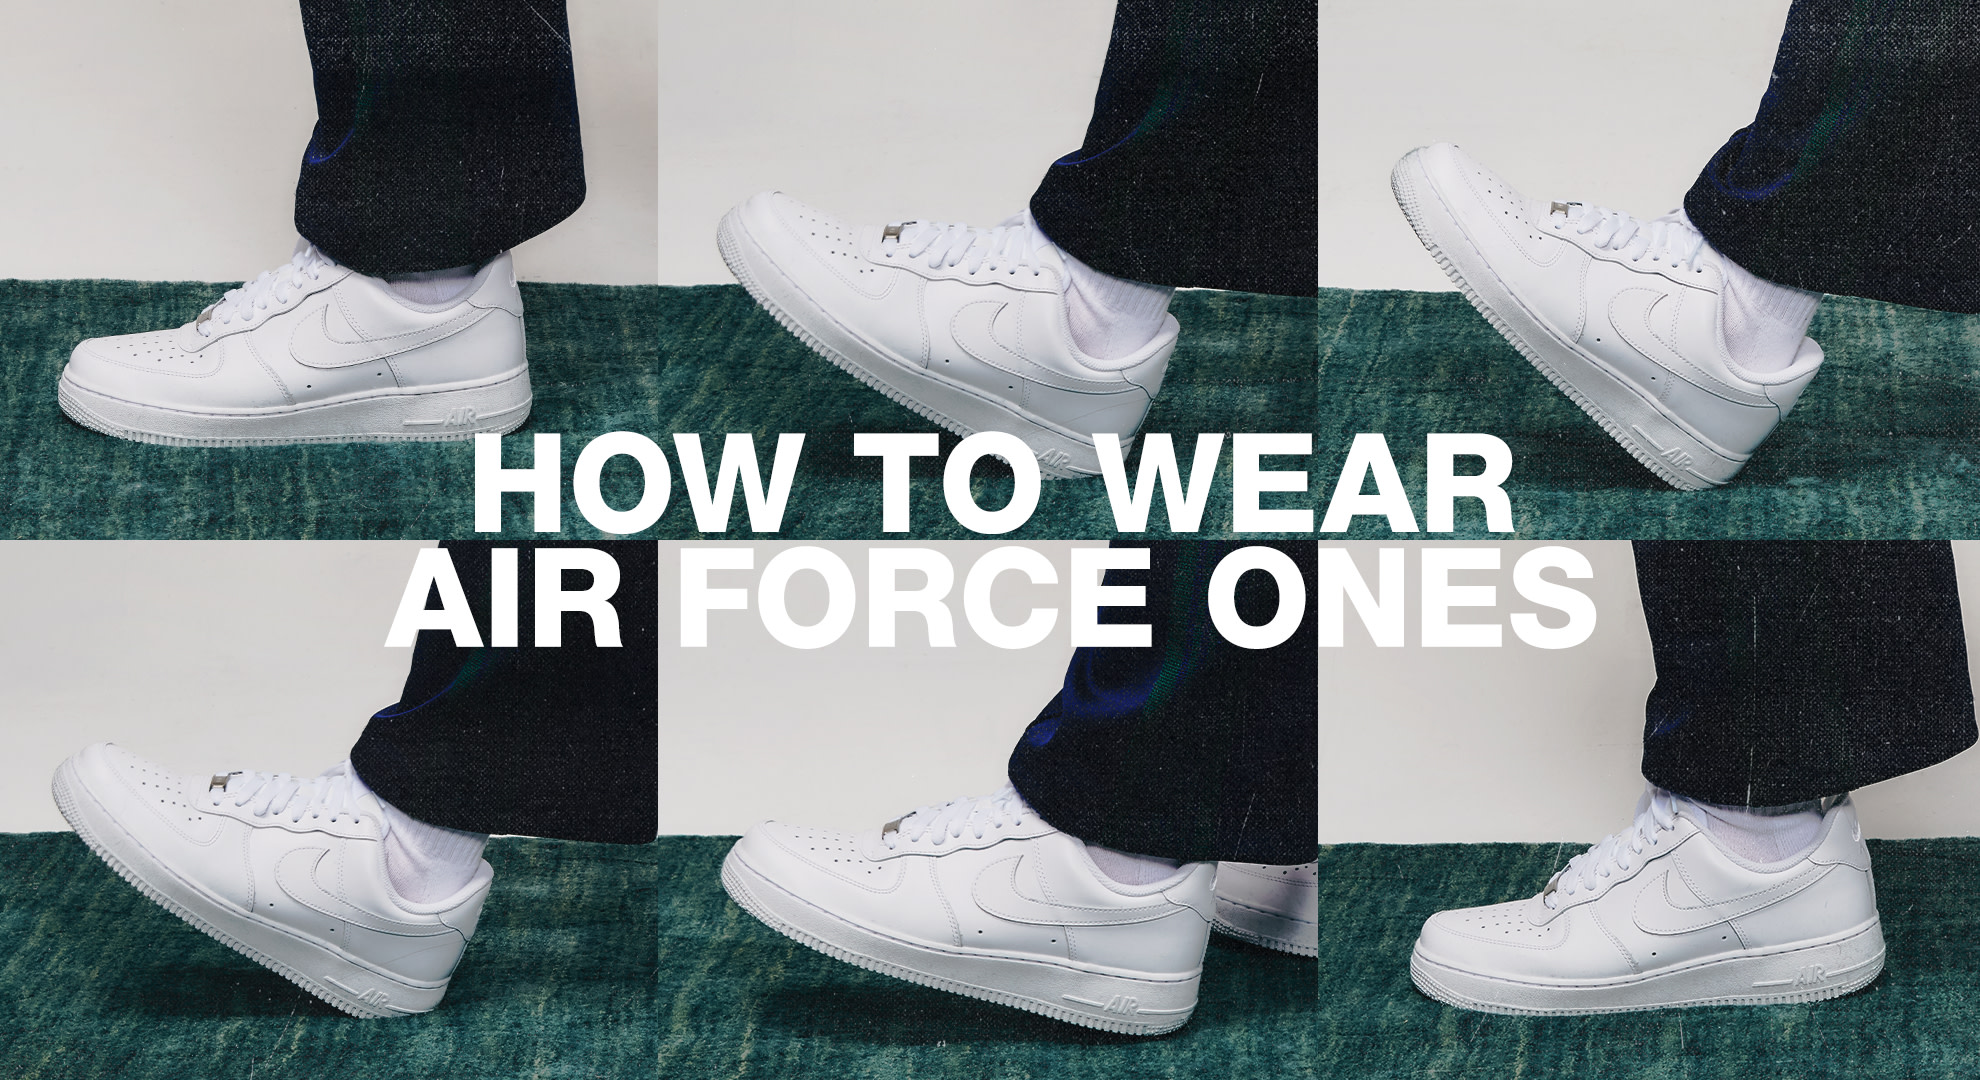 new style air force ones